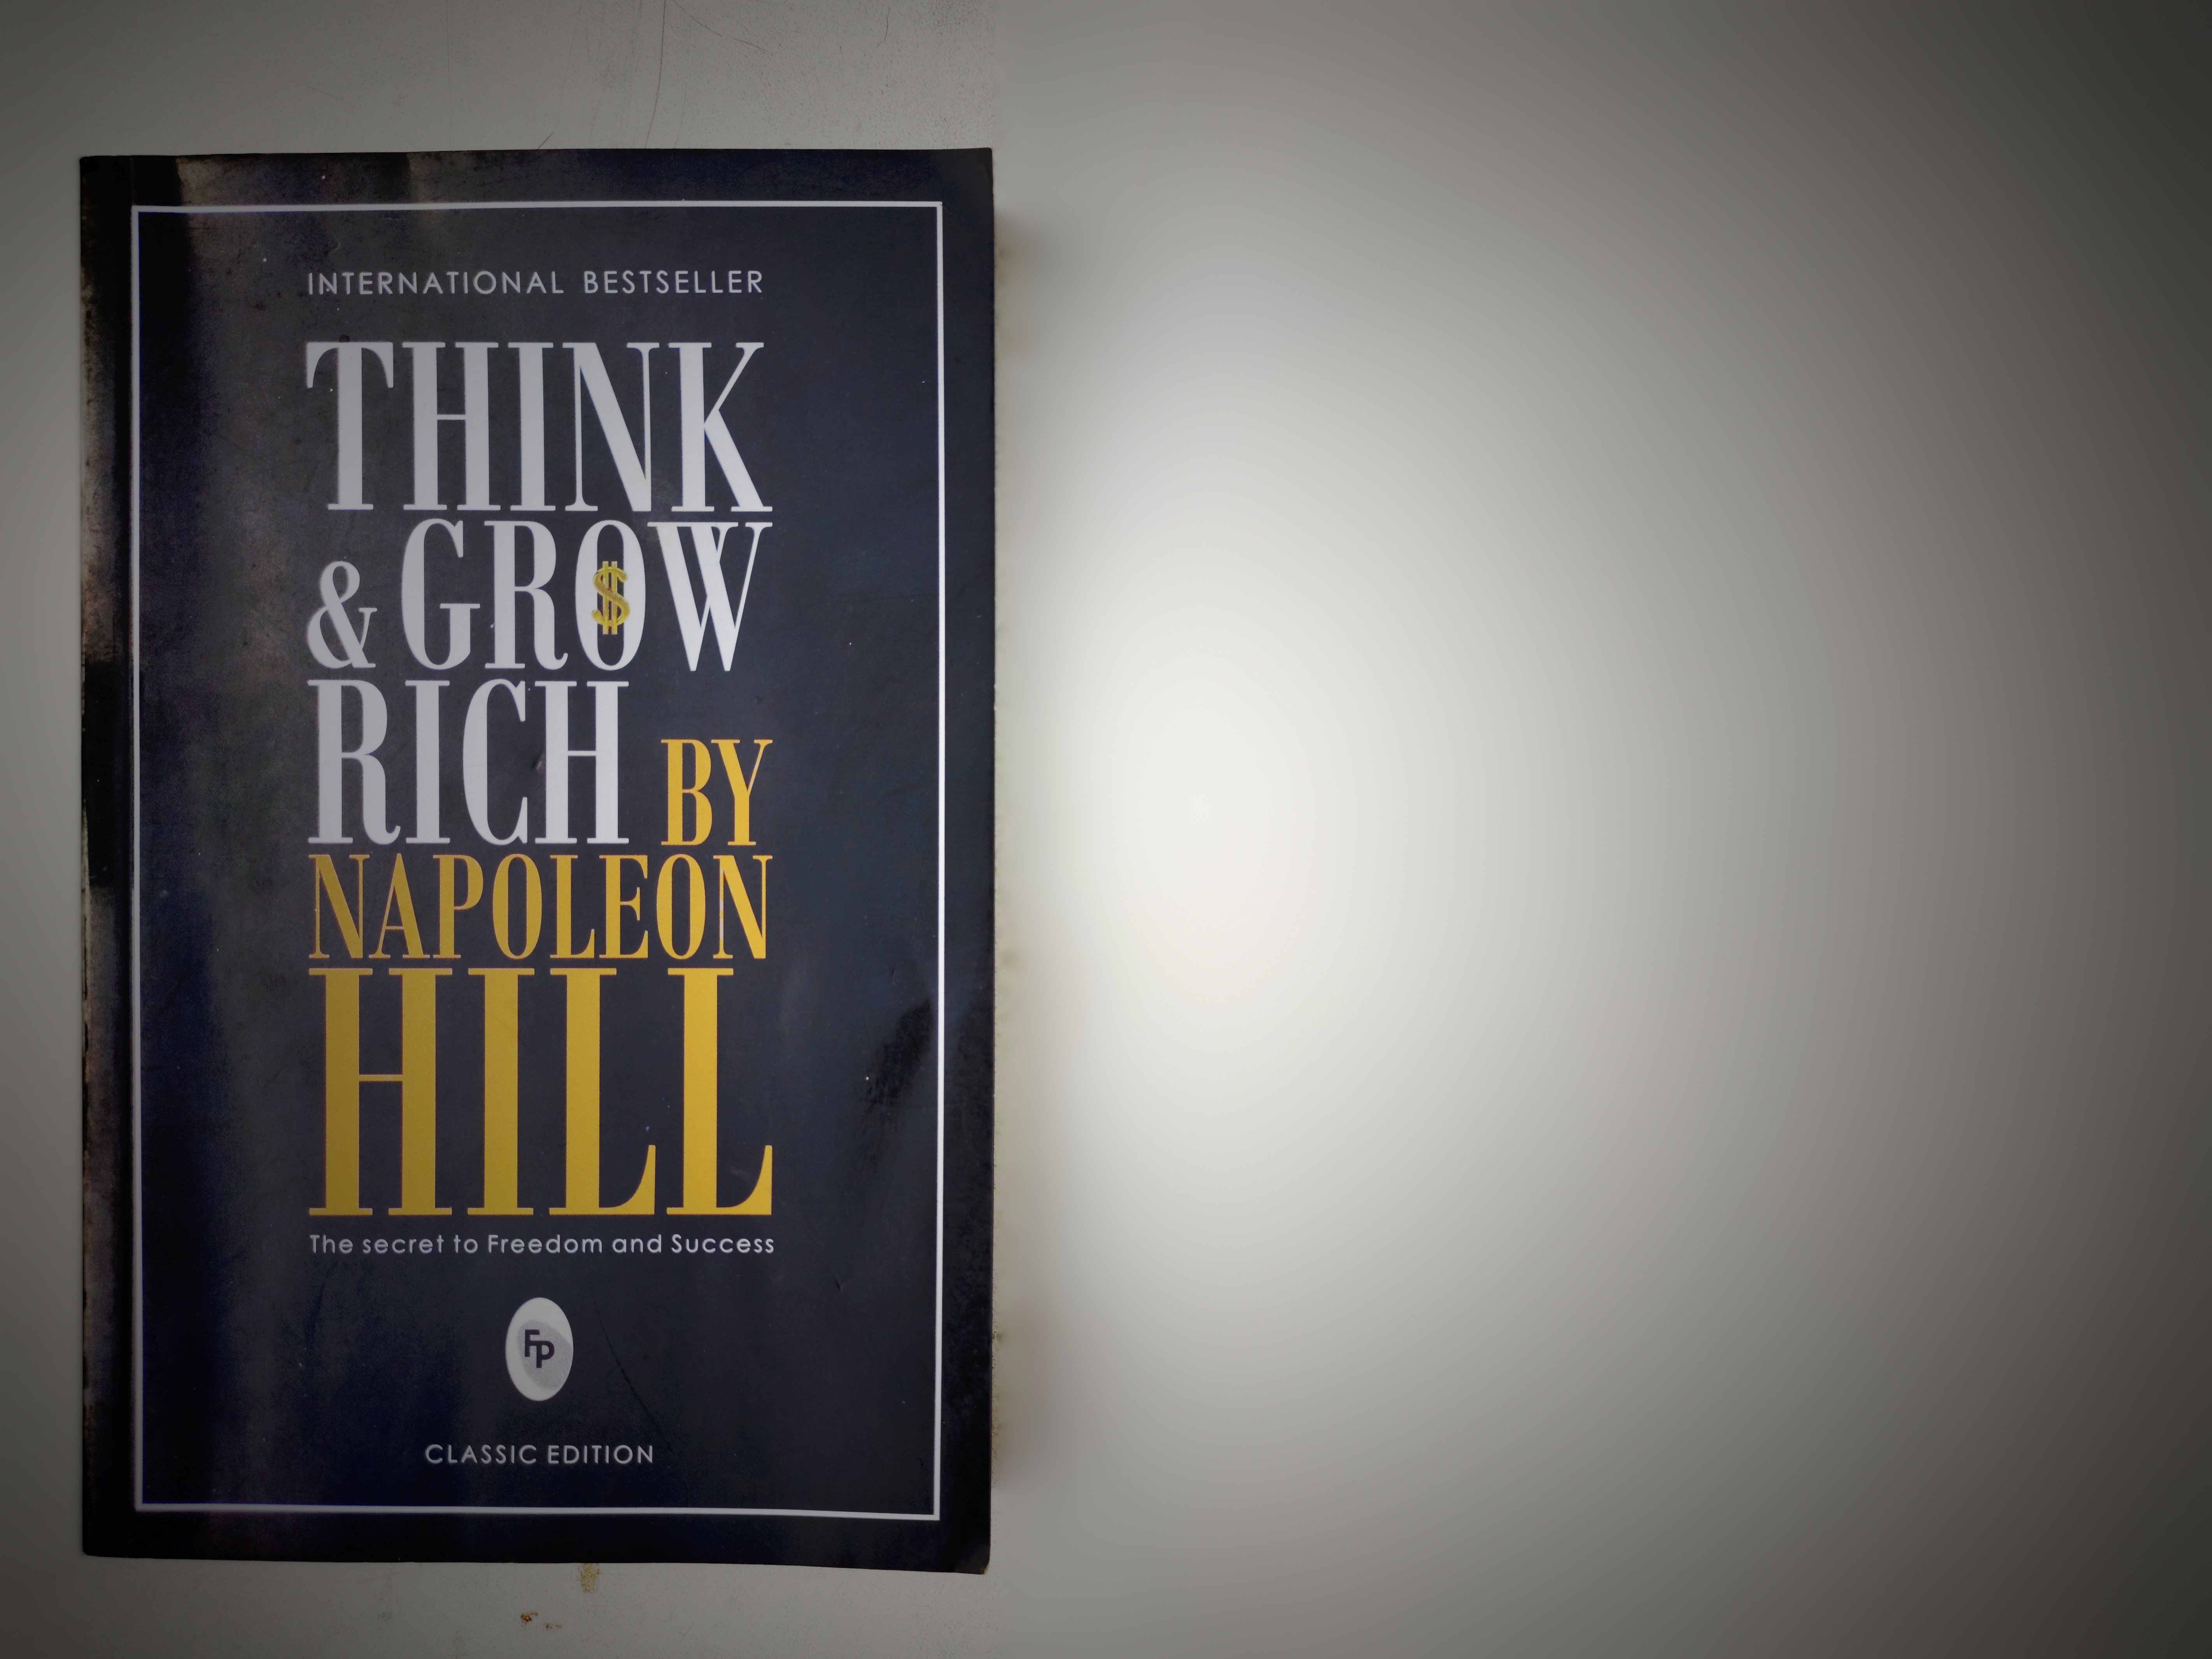 A copy of "Think & Grow Rich" by Napoleon Hill on a flat surface | Source: Shutterstock